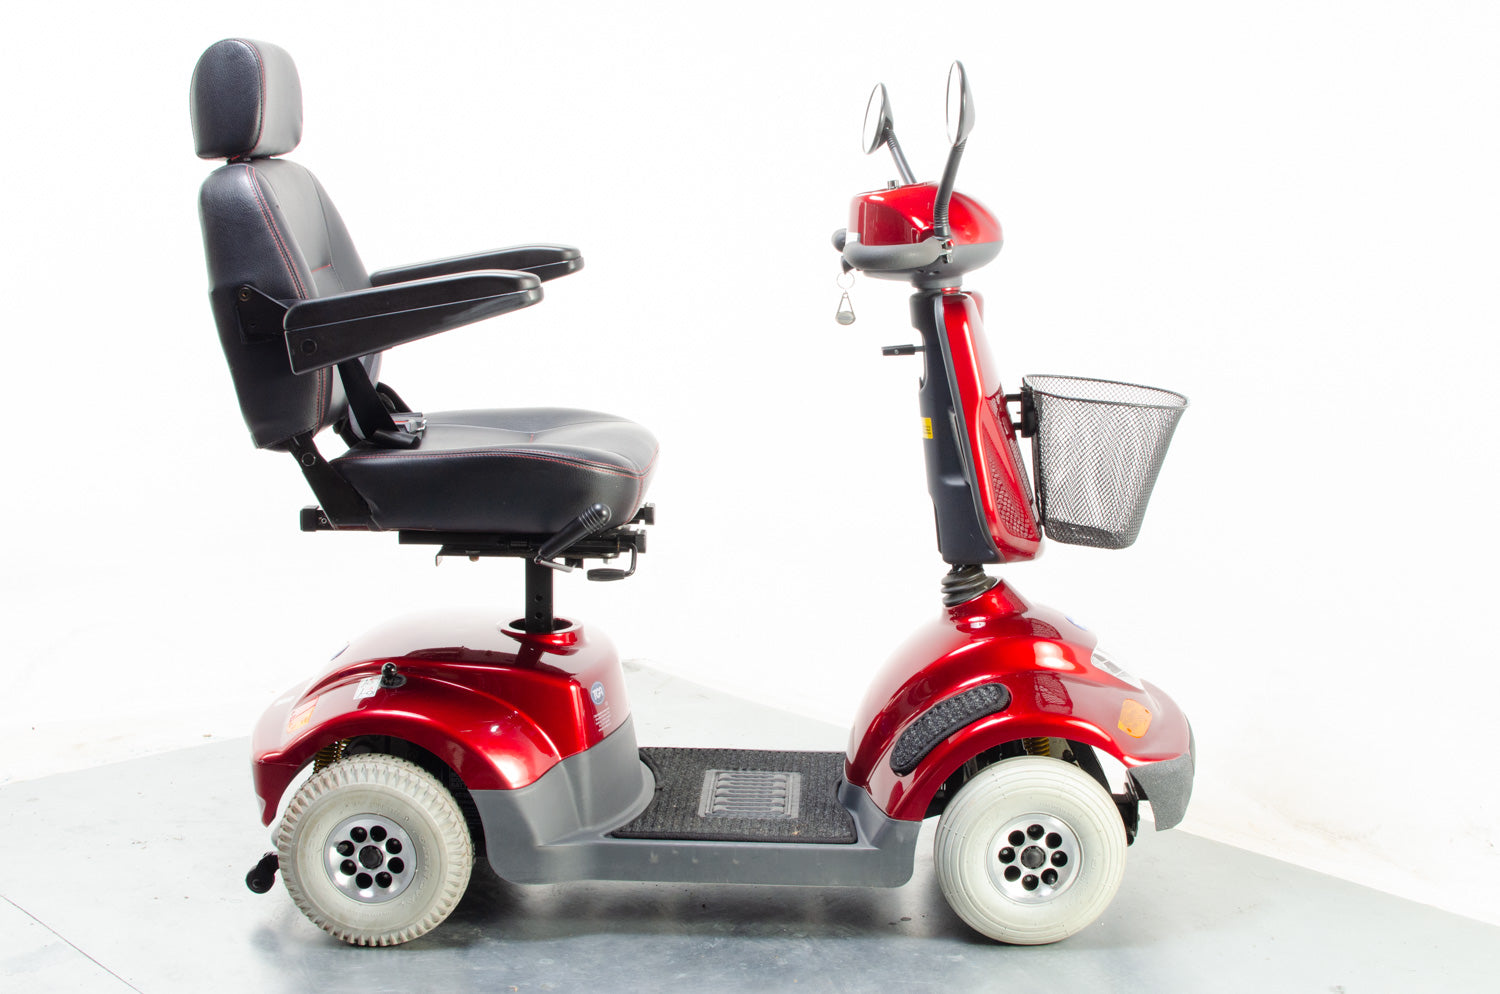 2014 TGA Sonet 6mph Mid Size Mobility Scooter in Red